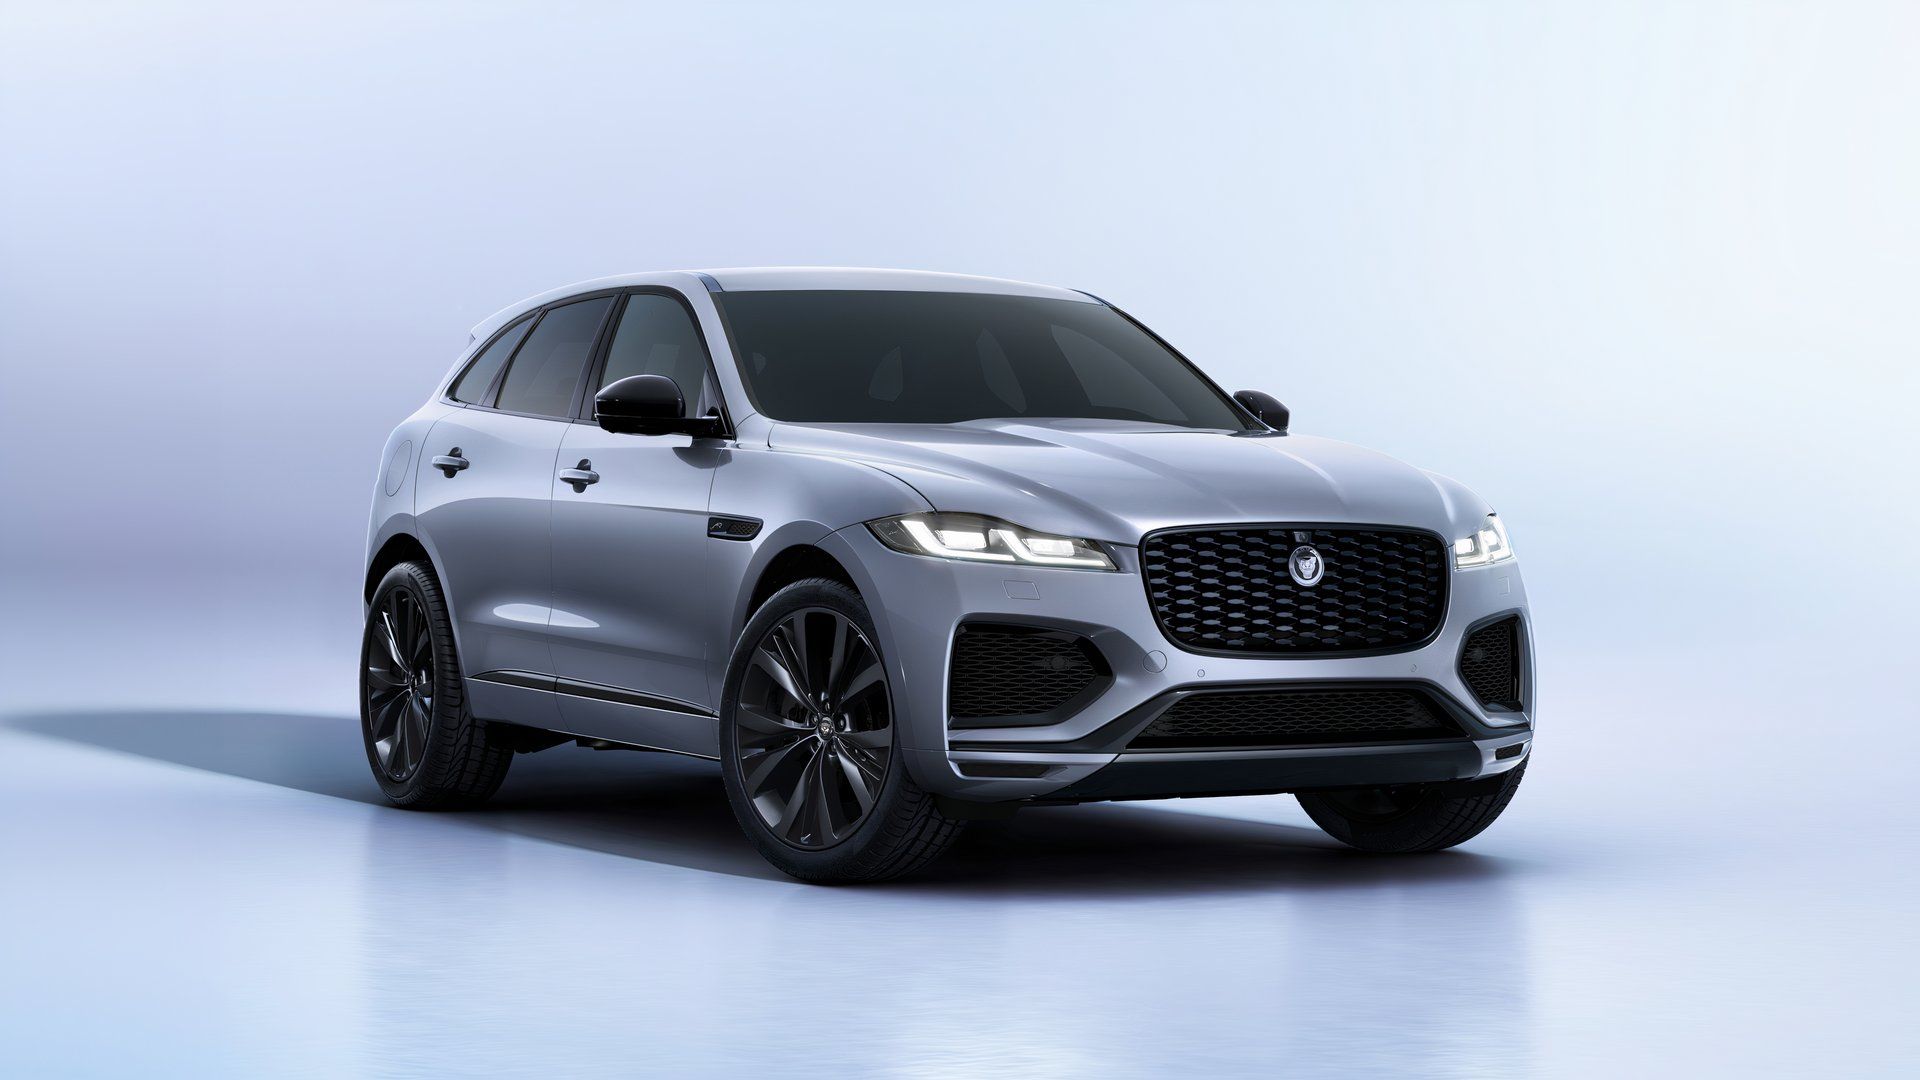 Jaguar Retires F-Pace With Subtle 90th Anniversary And Powerful SVR 575 Models